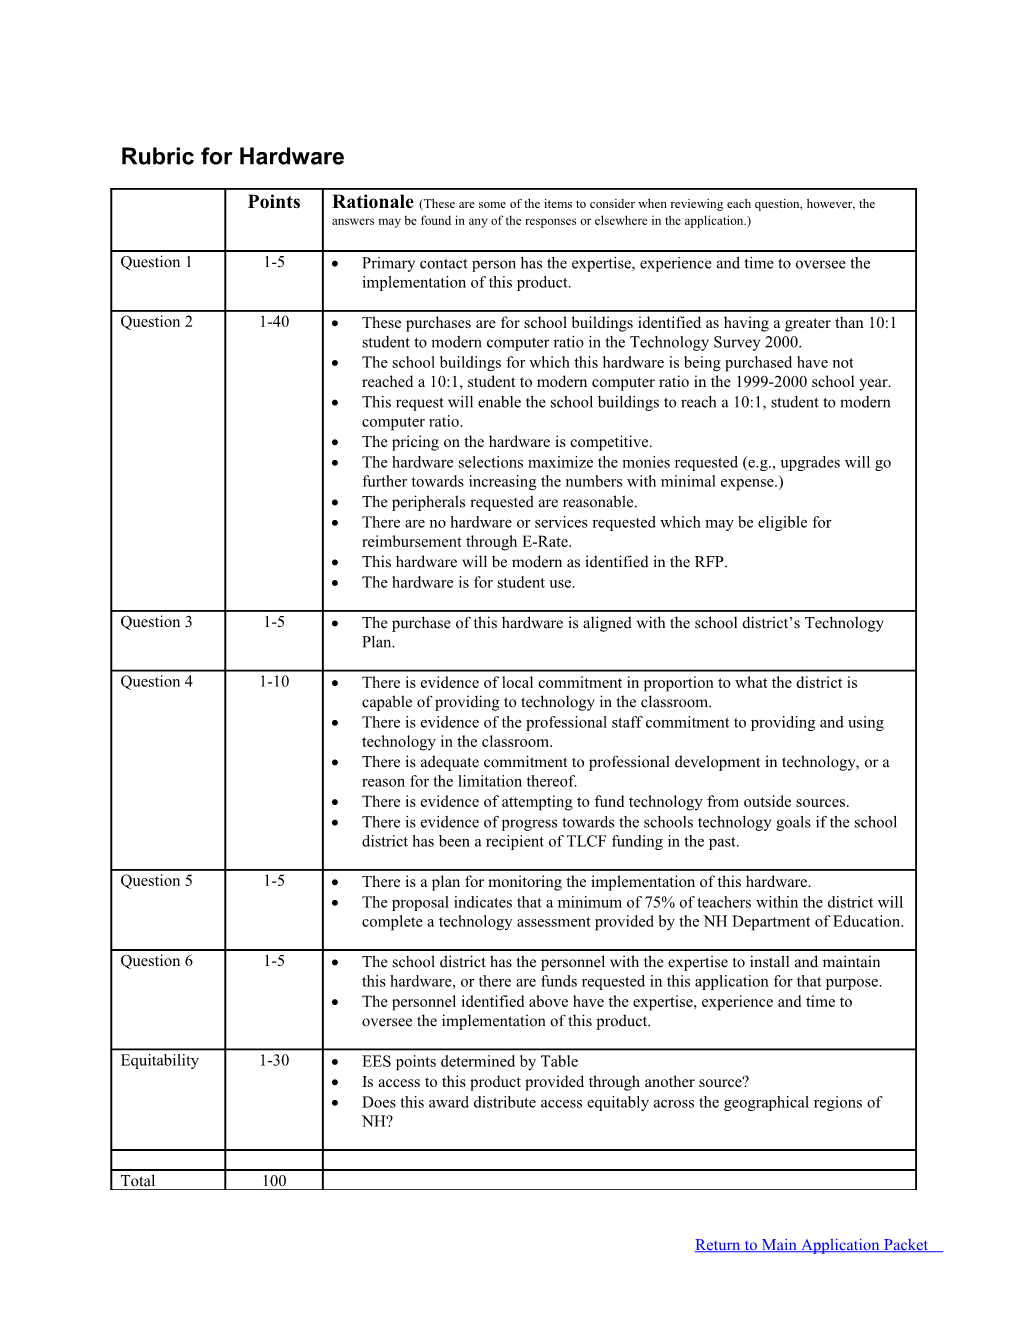 Rubric for Classroom Connect